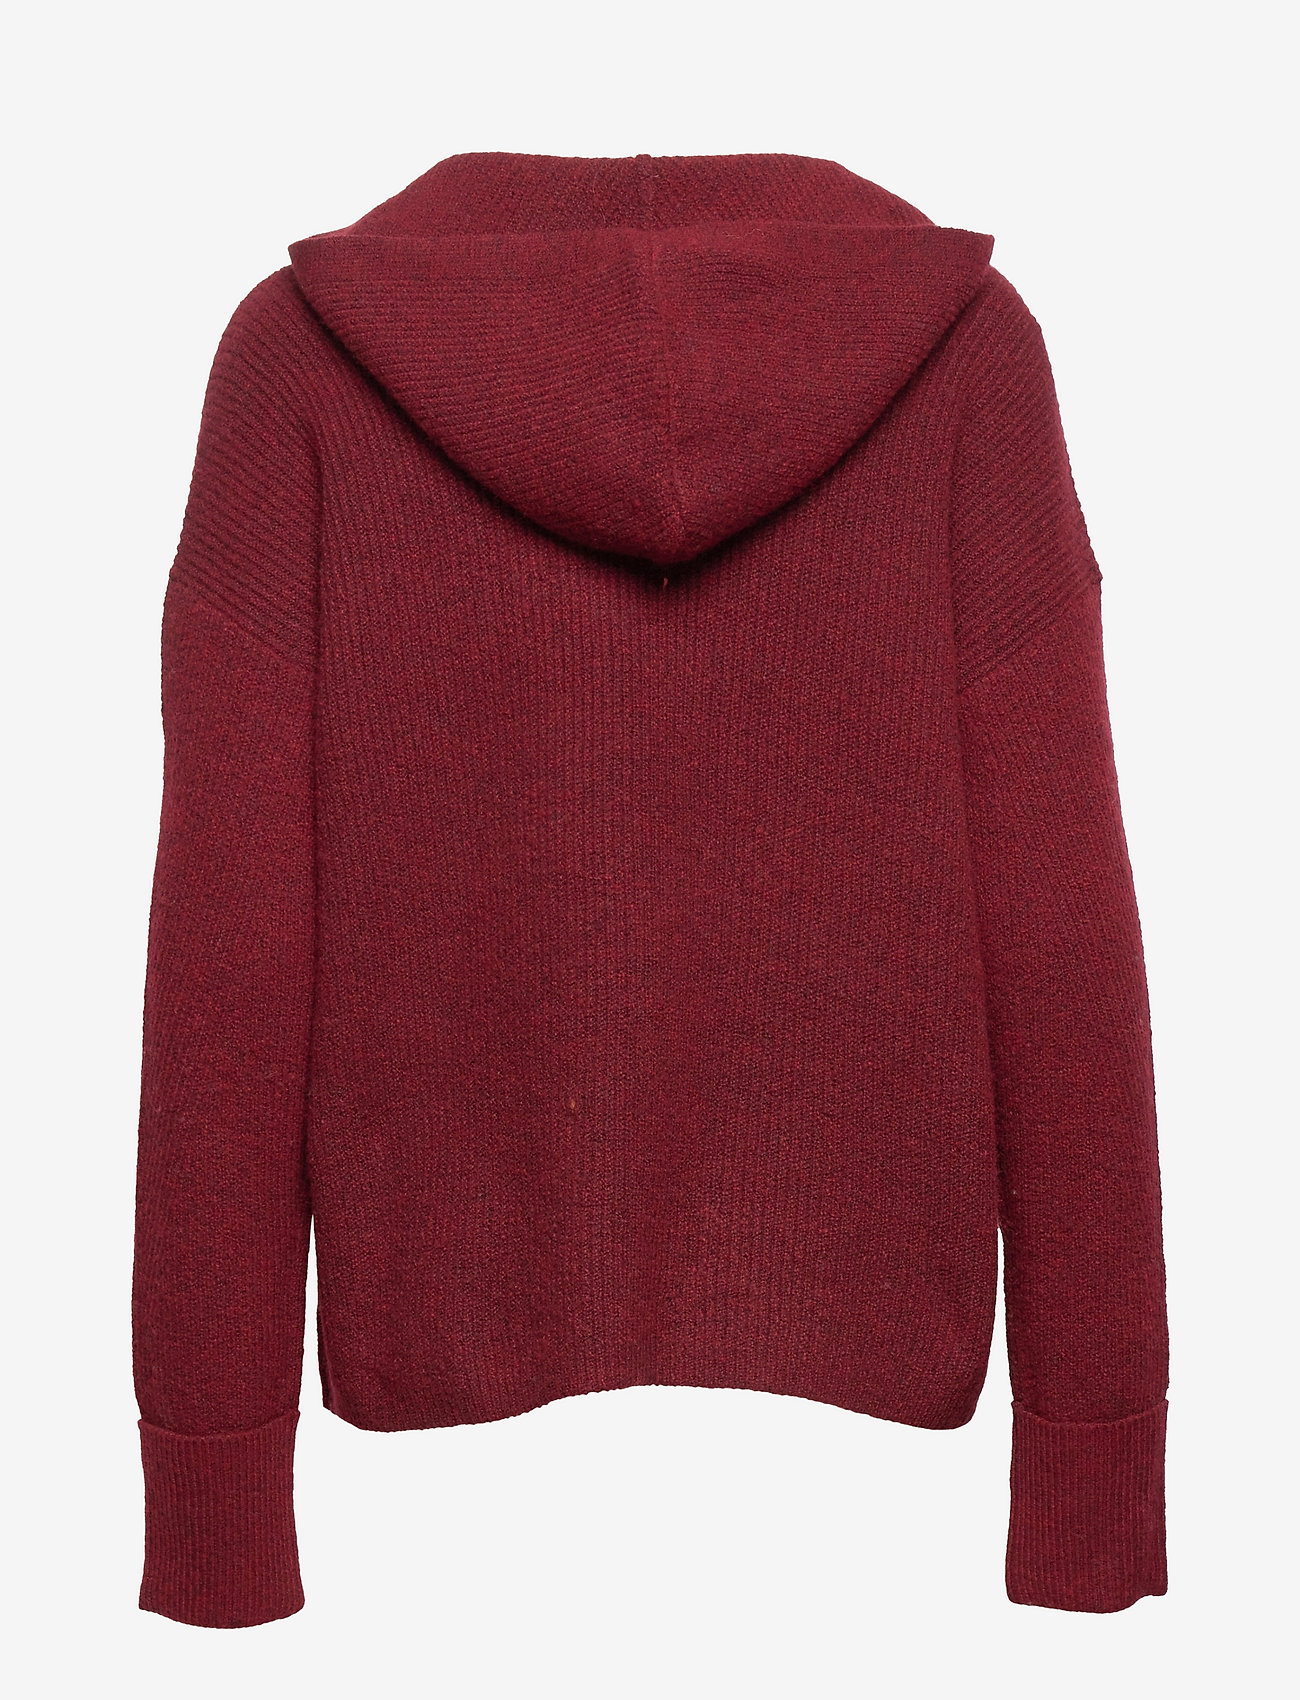 EDC by Esprit - Sweaters - swetry - dark red - 1